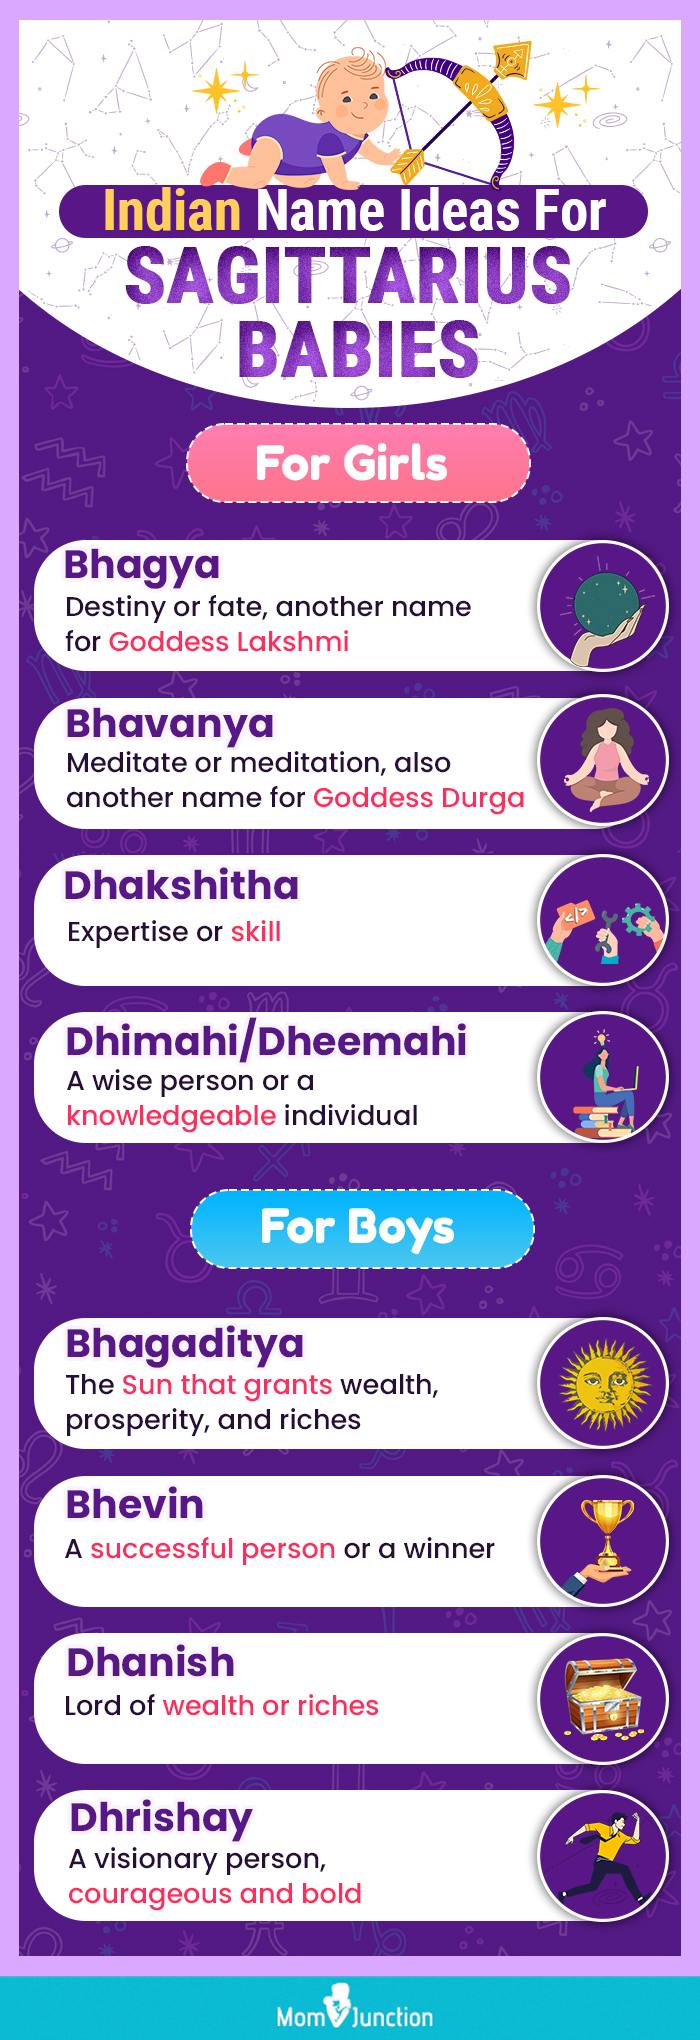 sagittarius baby names for boys and girls (infographic)